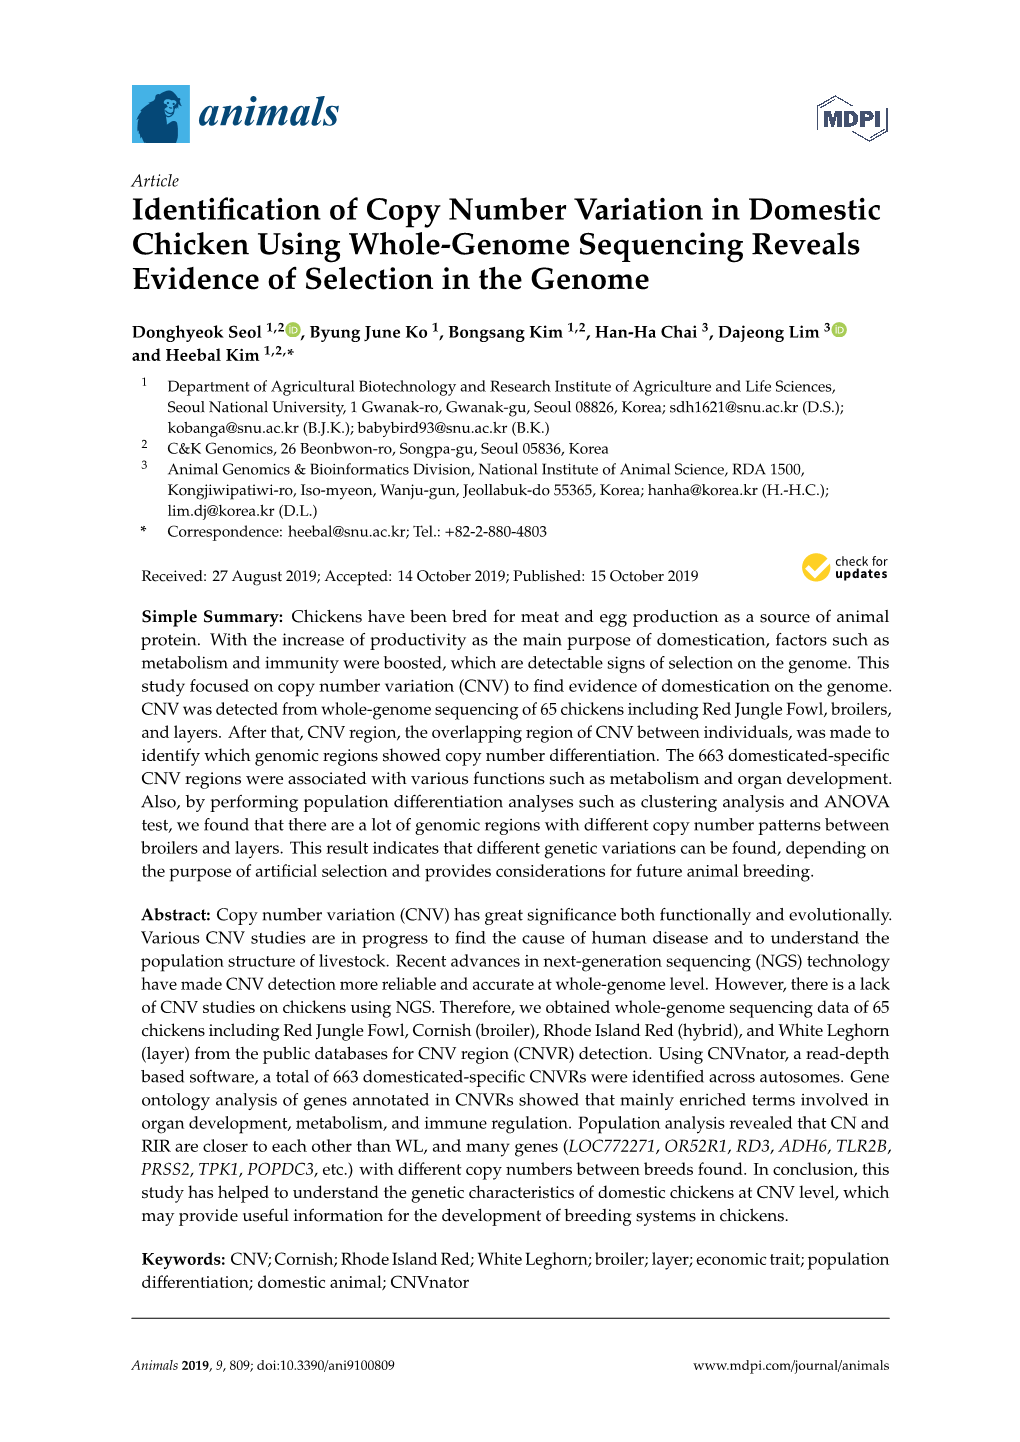 Identification of Copy Number Variation in Domestic Chicken